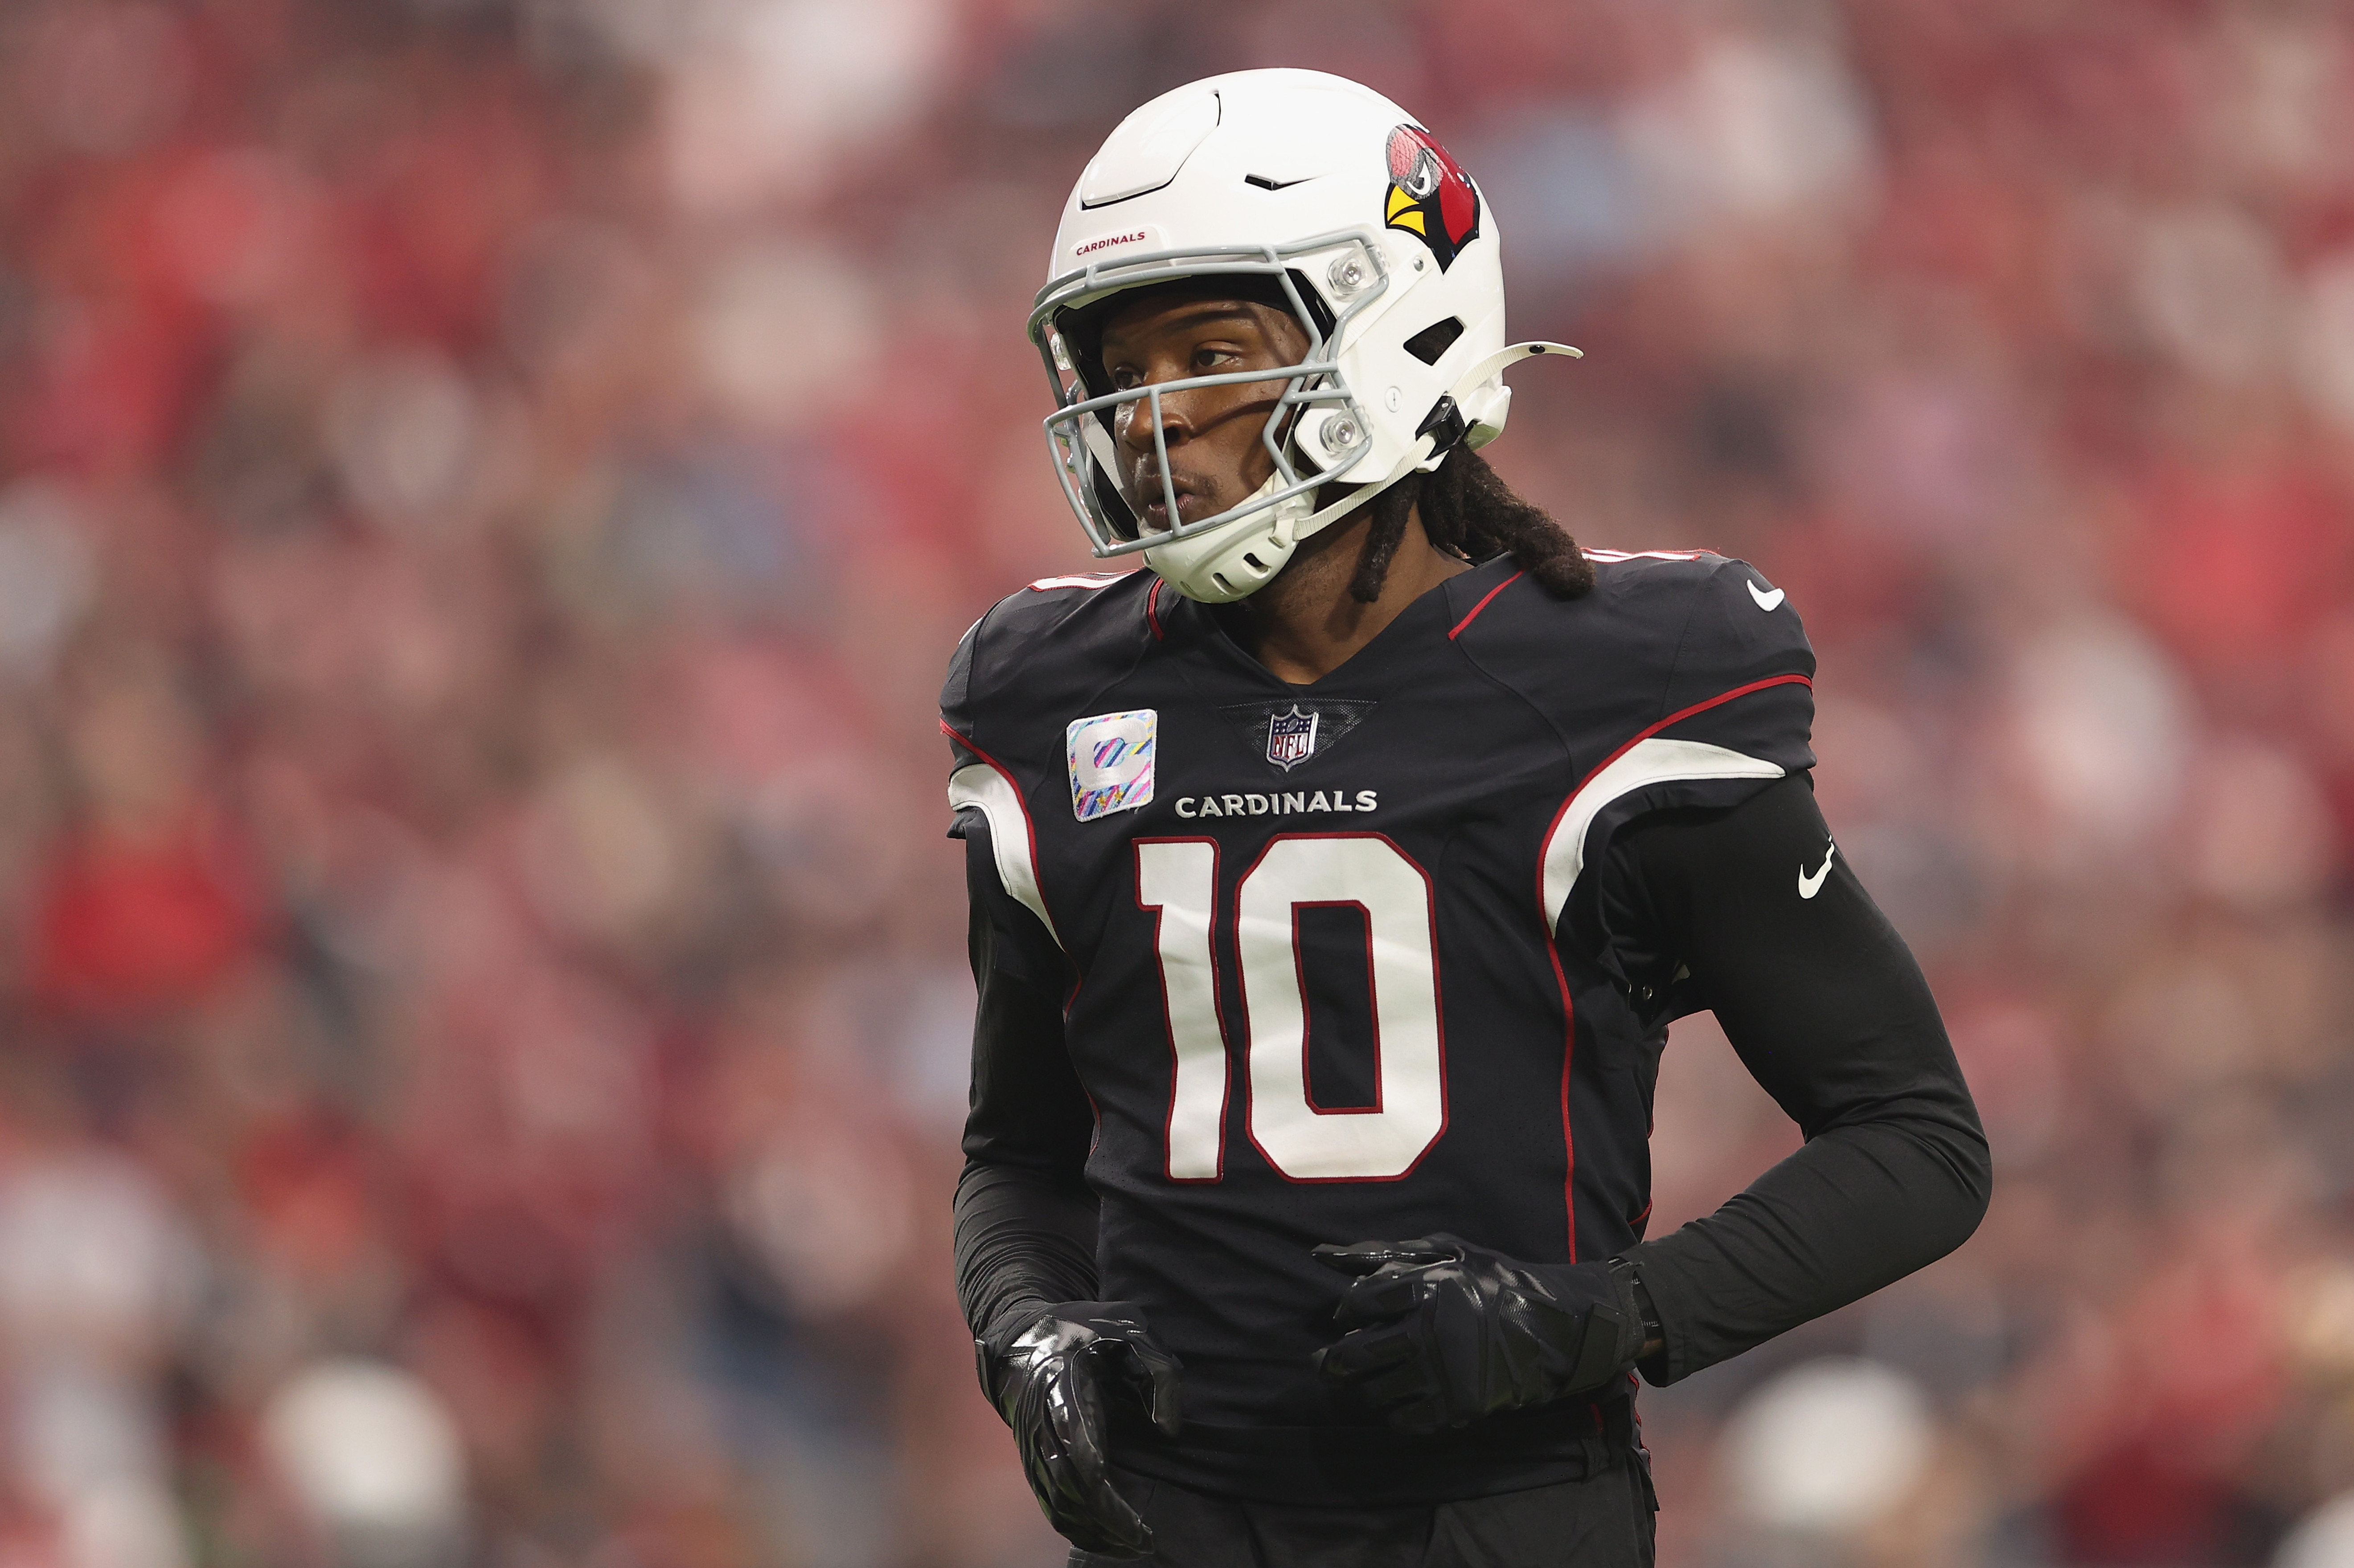 Cardinals’ DeAndre Hopkins Suspended 6 Games for Violating NFL’s PED Policy